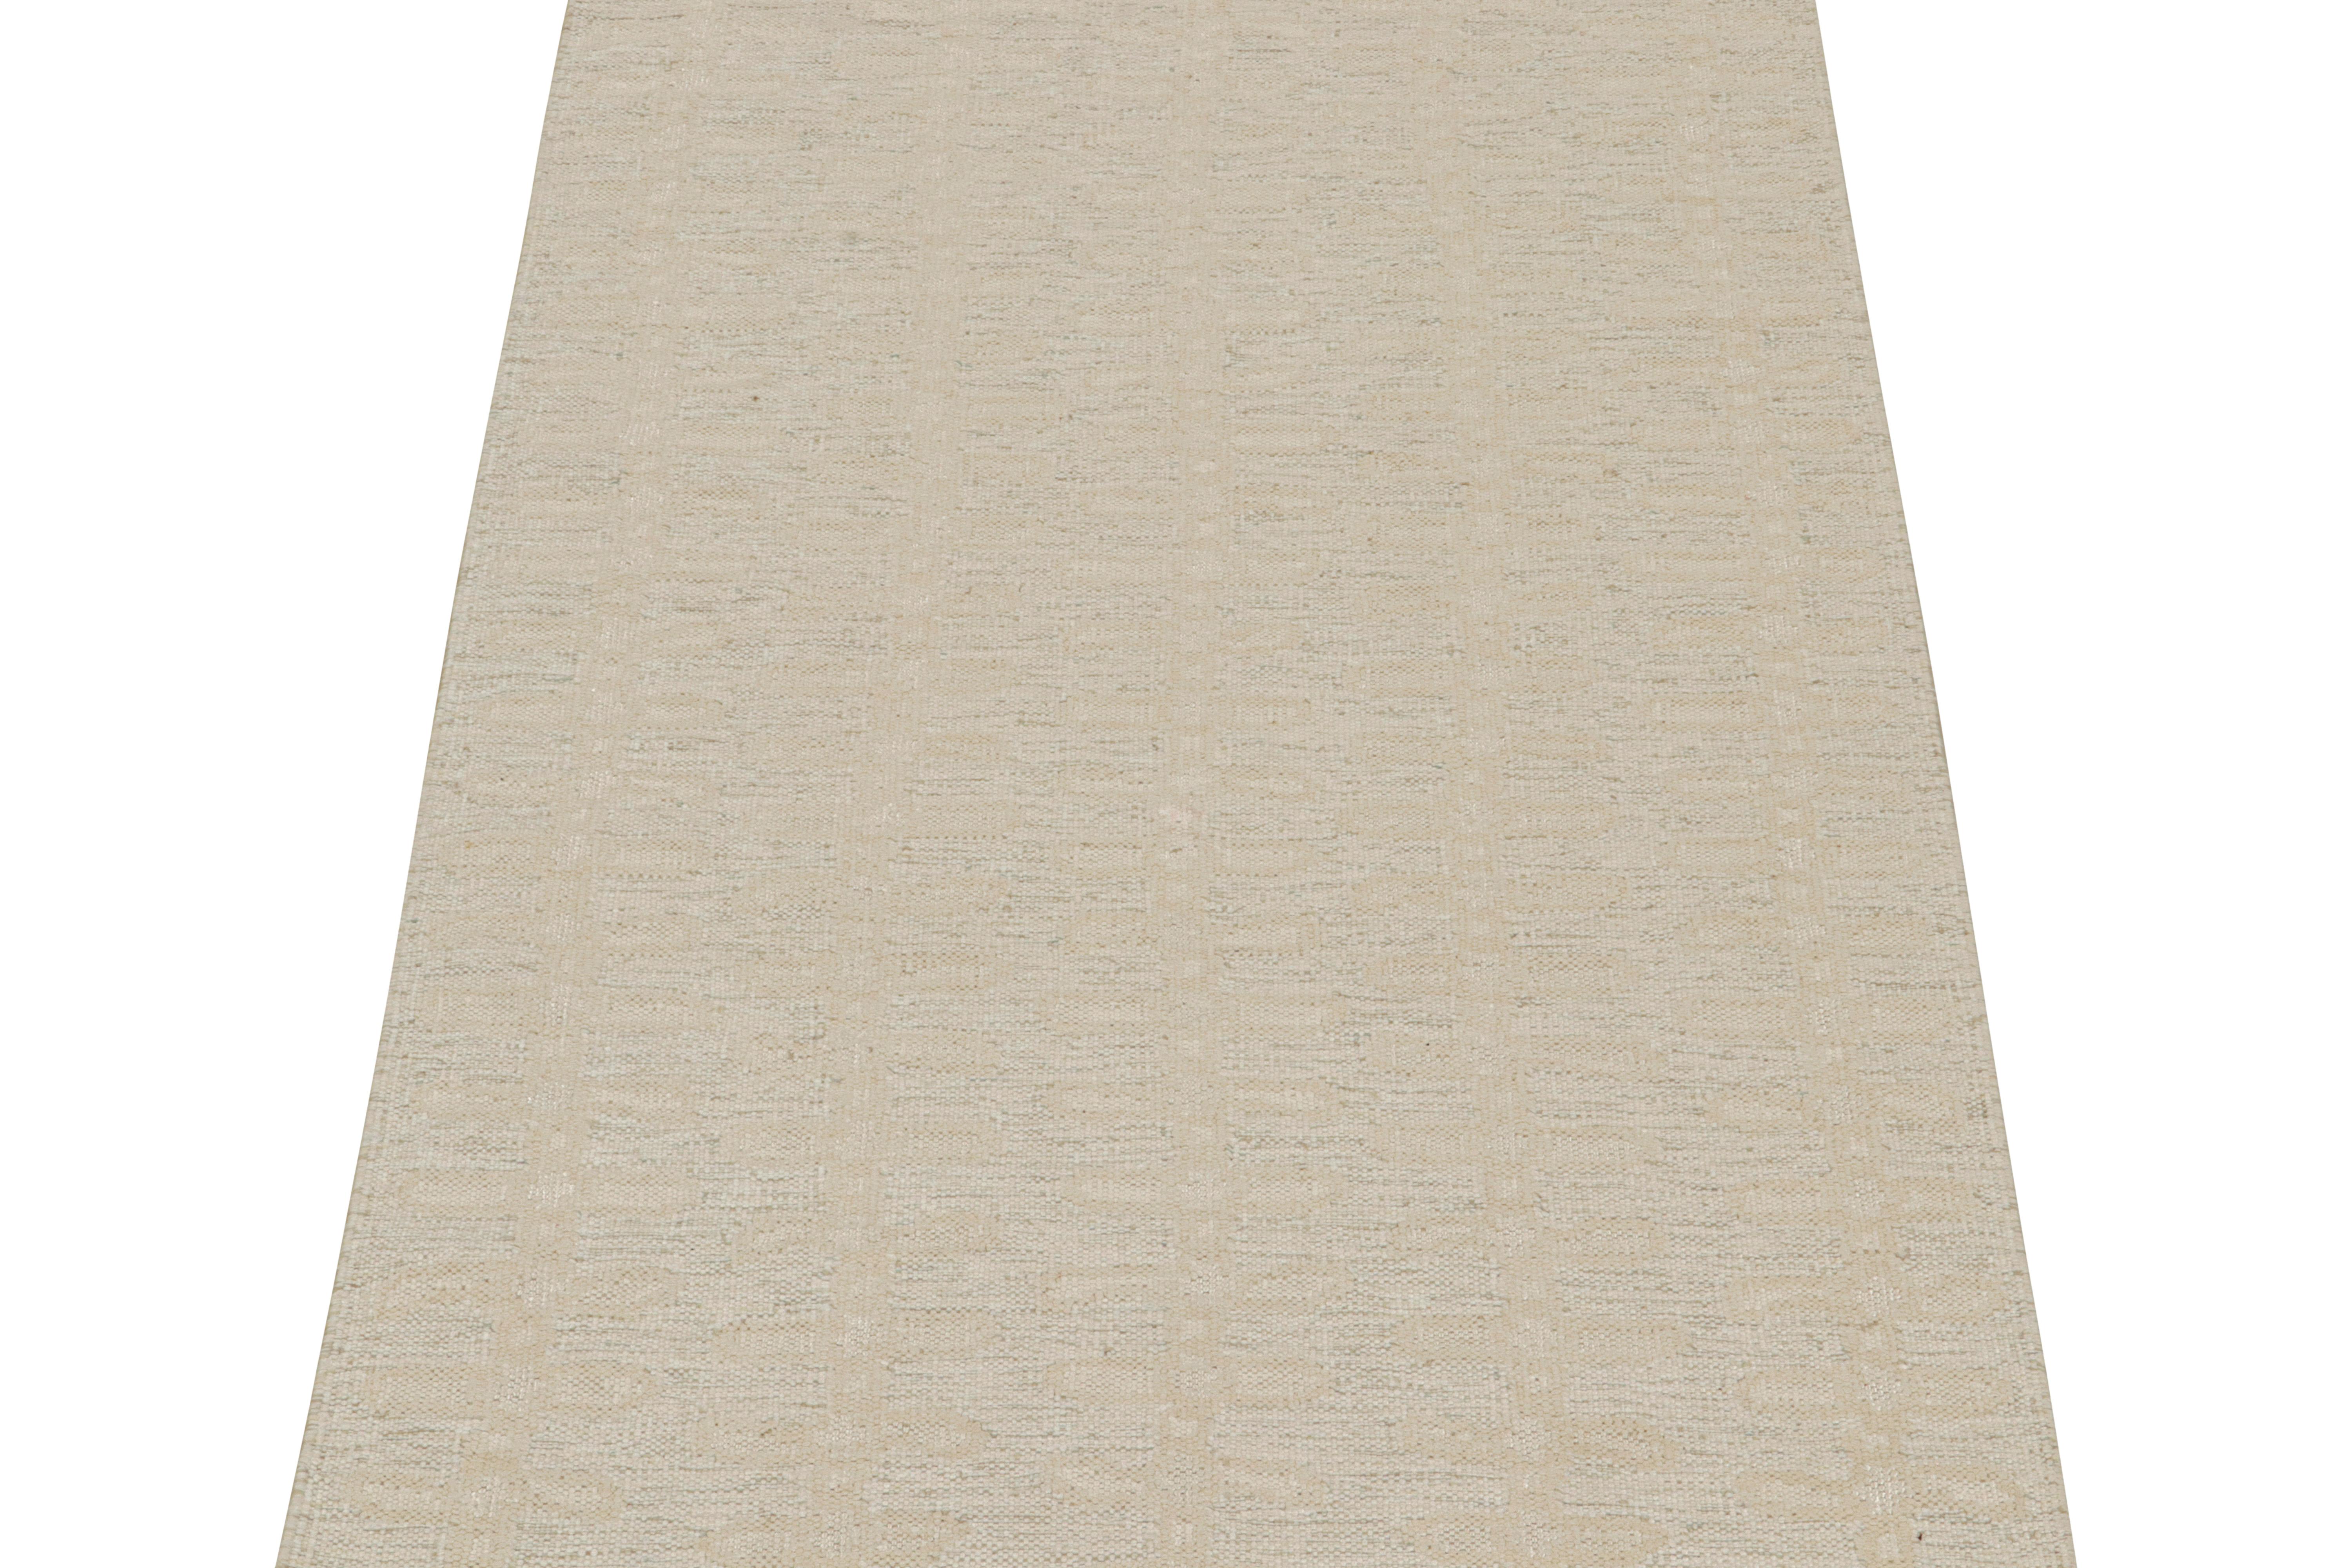 This 5x7 Kilim is a bold new addition to the Scandinavian Collection by Rug & Kilim. Handwoven in wool and natural yarns, its design reflects a contemporary take on mid-century Rollakans and Swedish Deco style.

On the design:

This new flat weave